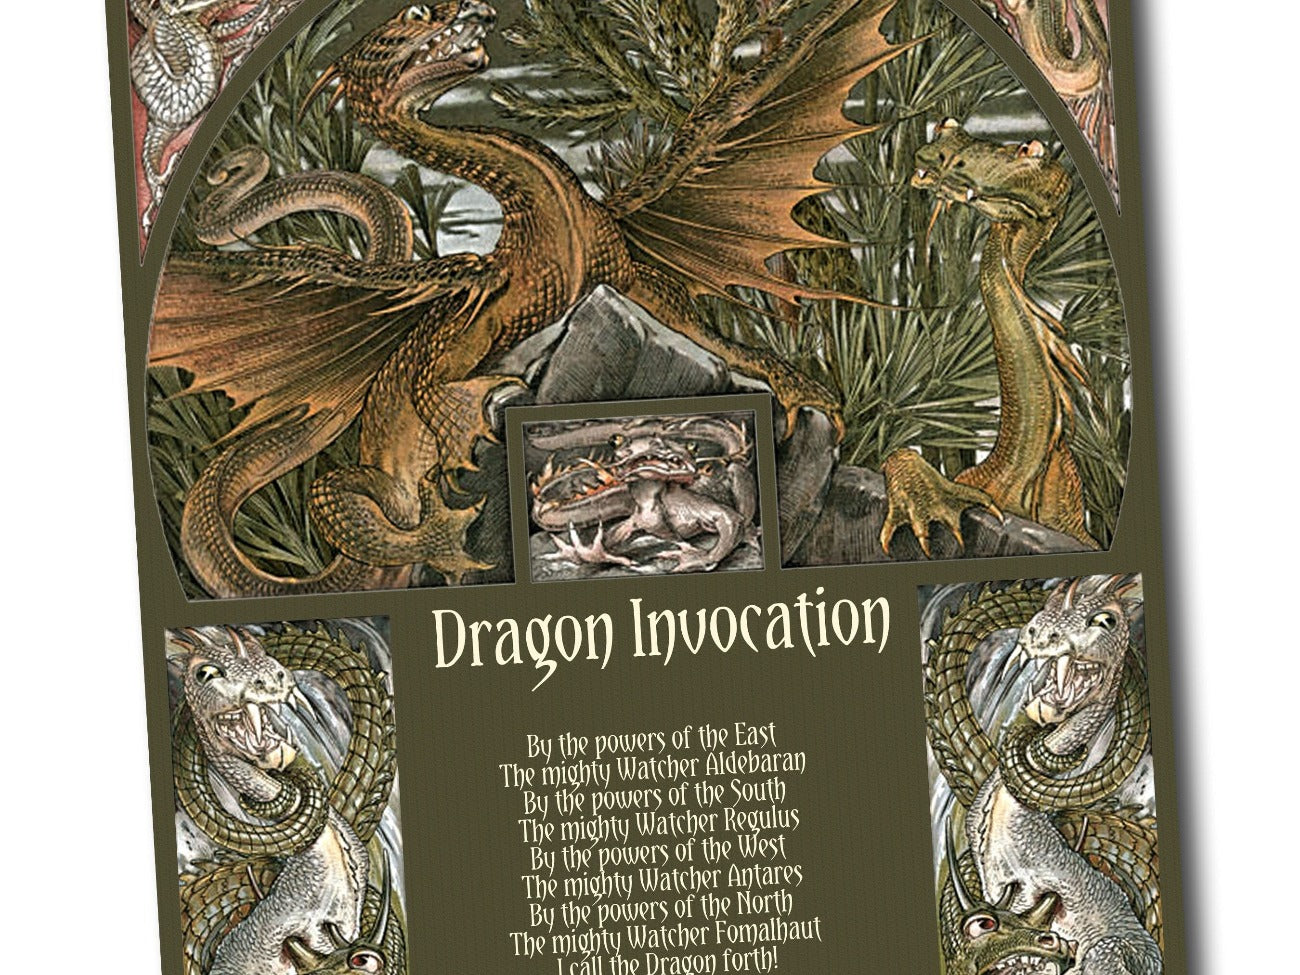 DRAGON INVOCATION, Call a Dragon into a Magick Circle, Summon a Dragon, Wicca Chant Prayer, Folklore Witchcraft Ritual, Dragon Moon Spell - Morgana Magick Spell